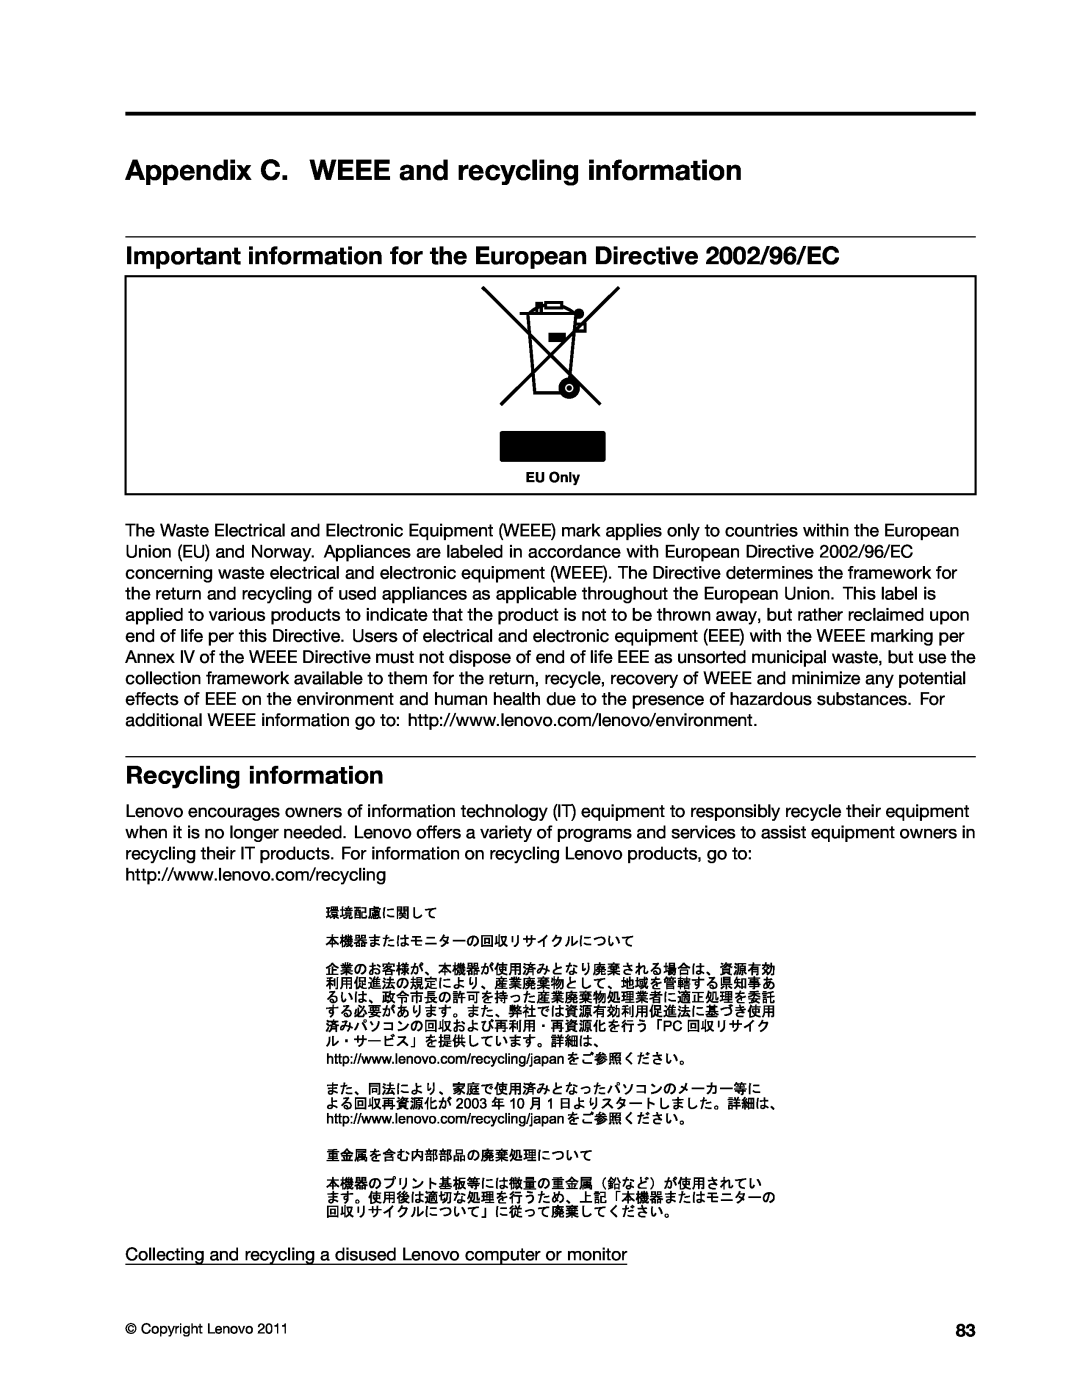 Lenovo 7783, 7782 Appendix C. WEEE and recycling information, Important information for the European Directive 2002/96/EC 